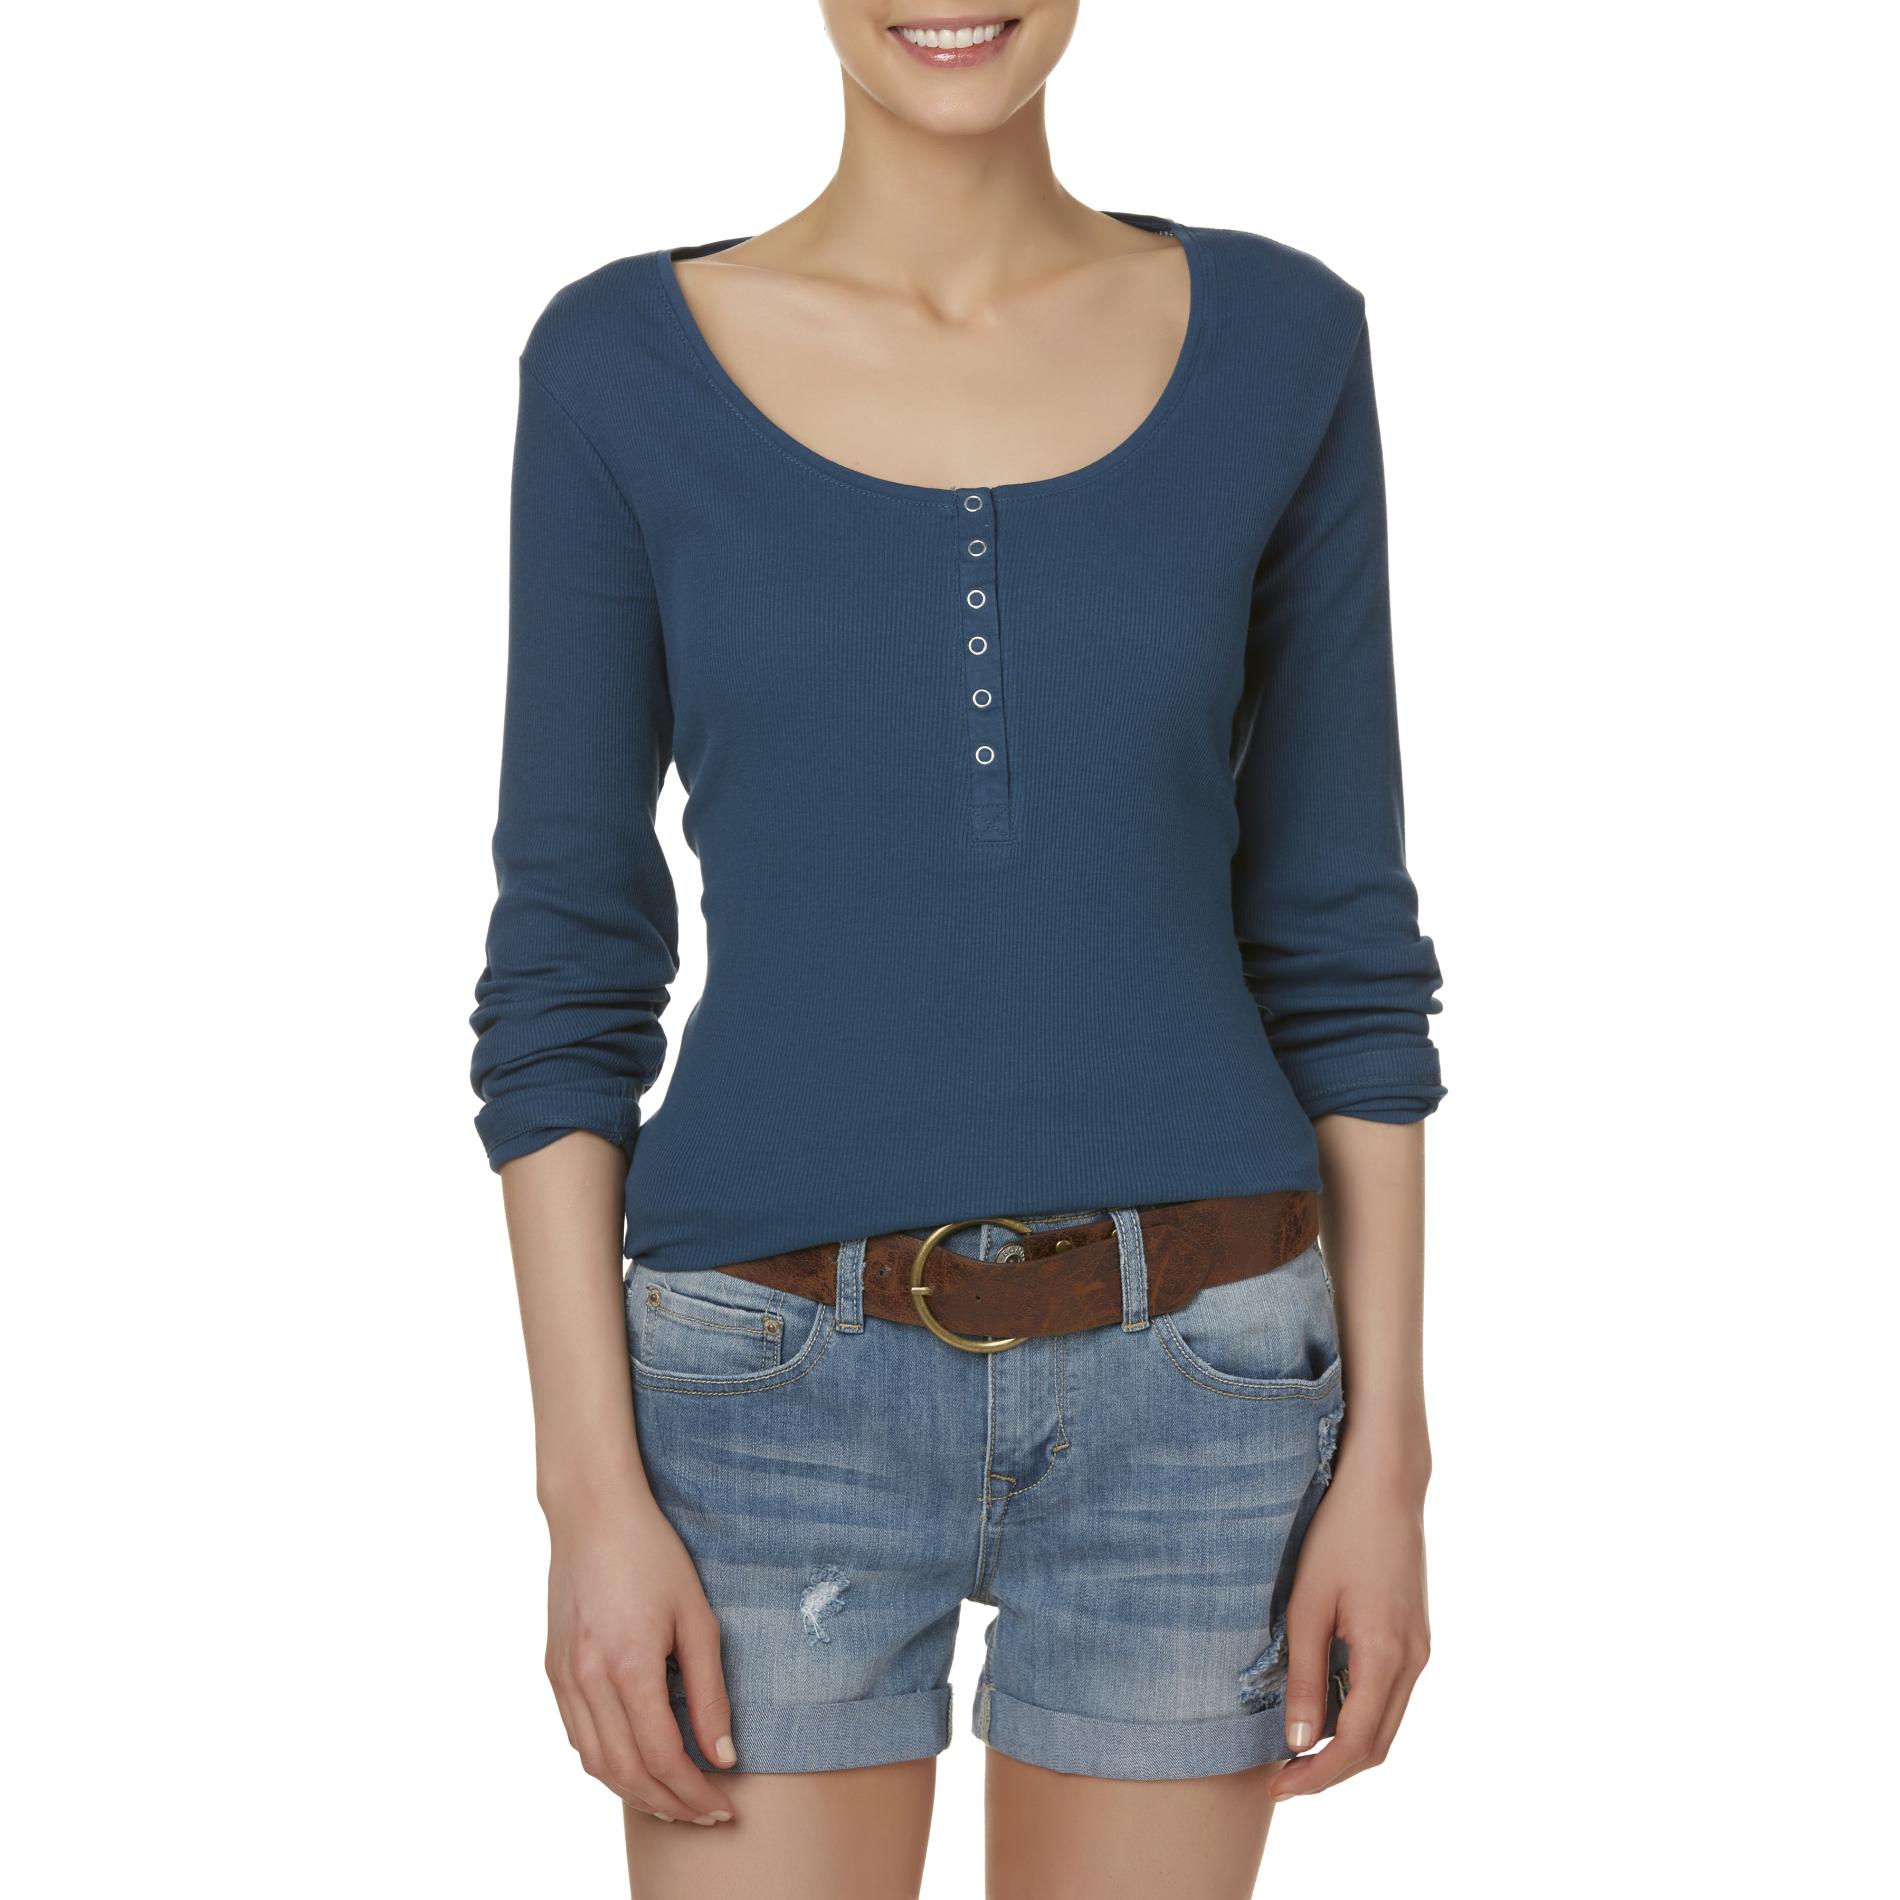 Simply Styled Women's Long-Sleeve Henley Top